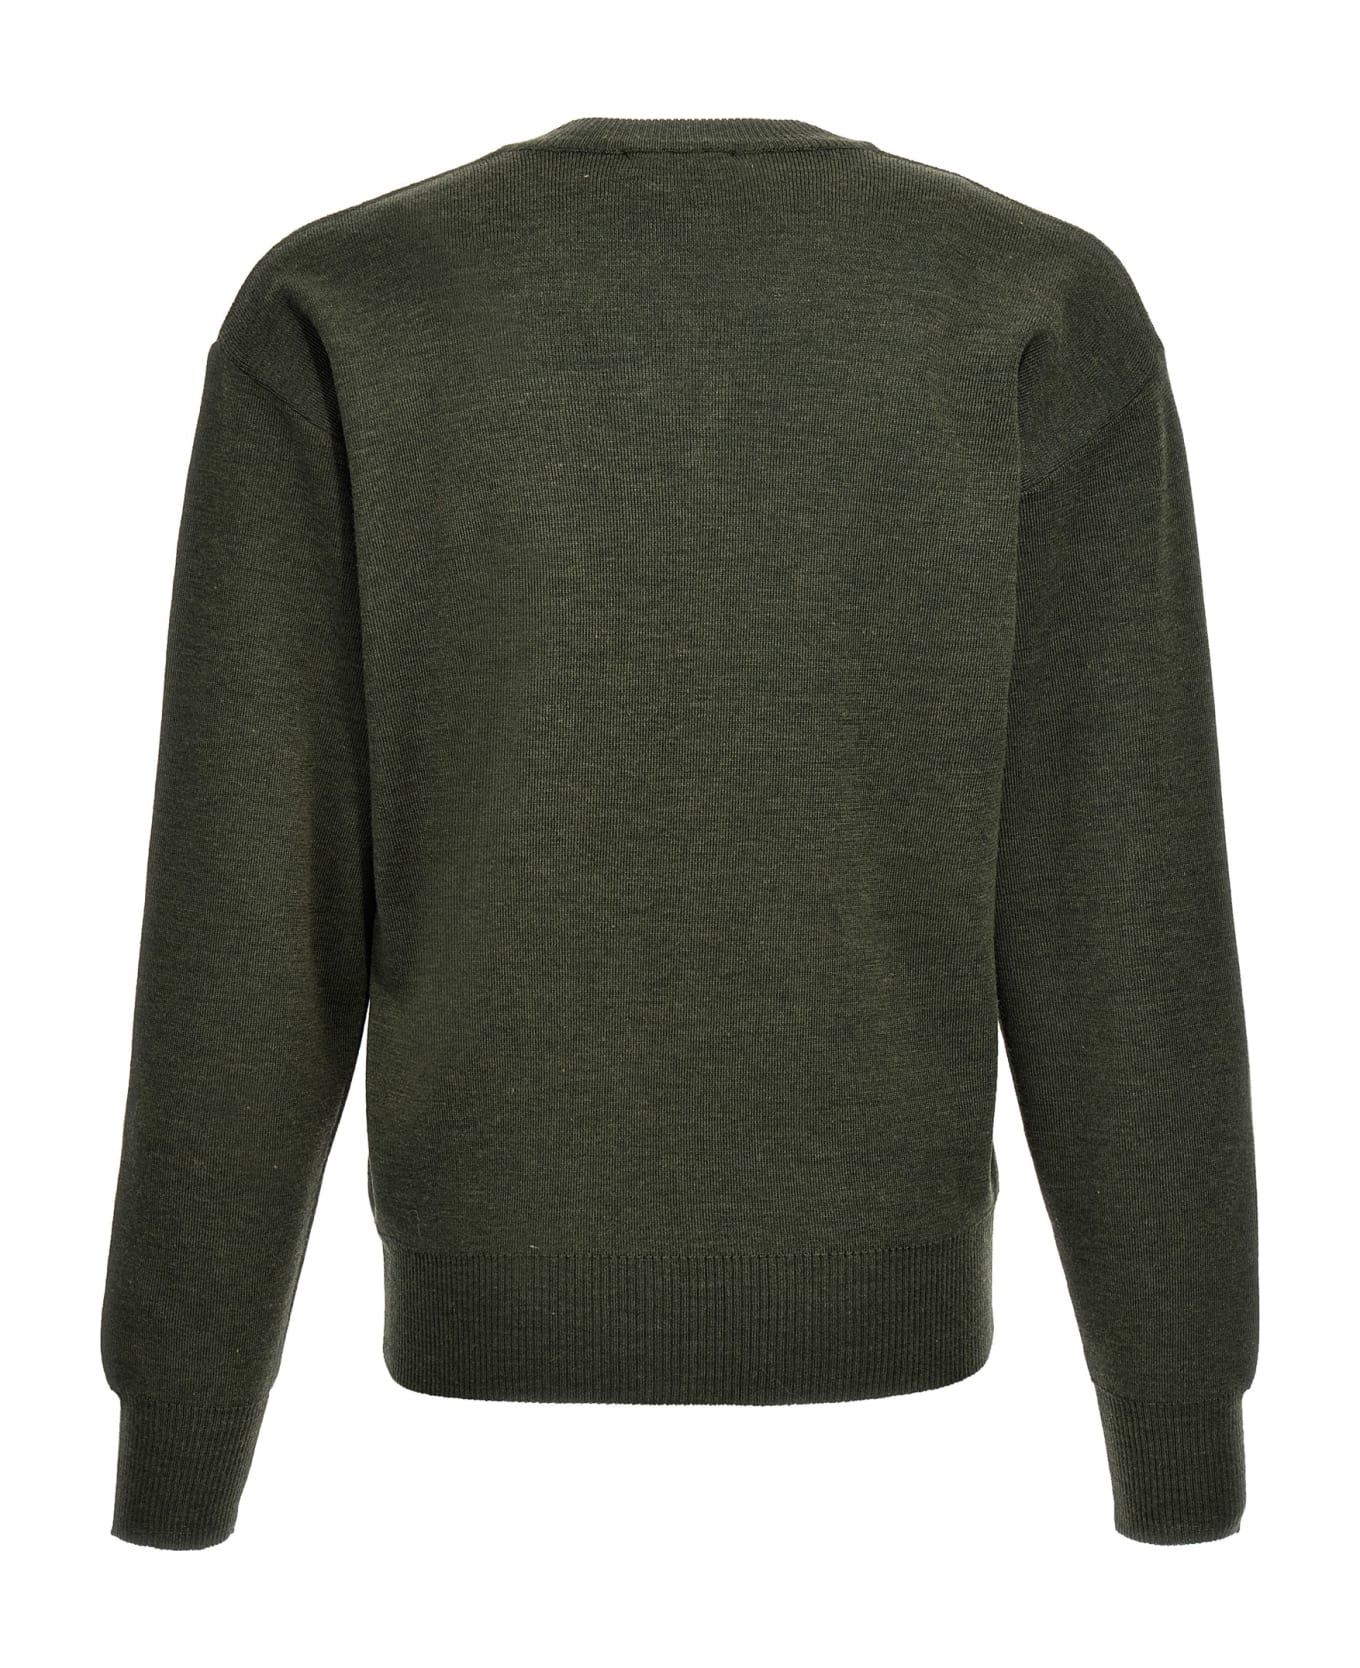 Lemaire V-neck Sweater - Ivy Green name:475